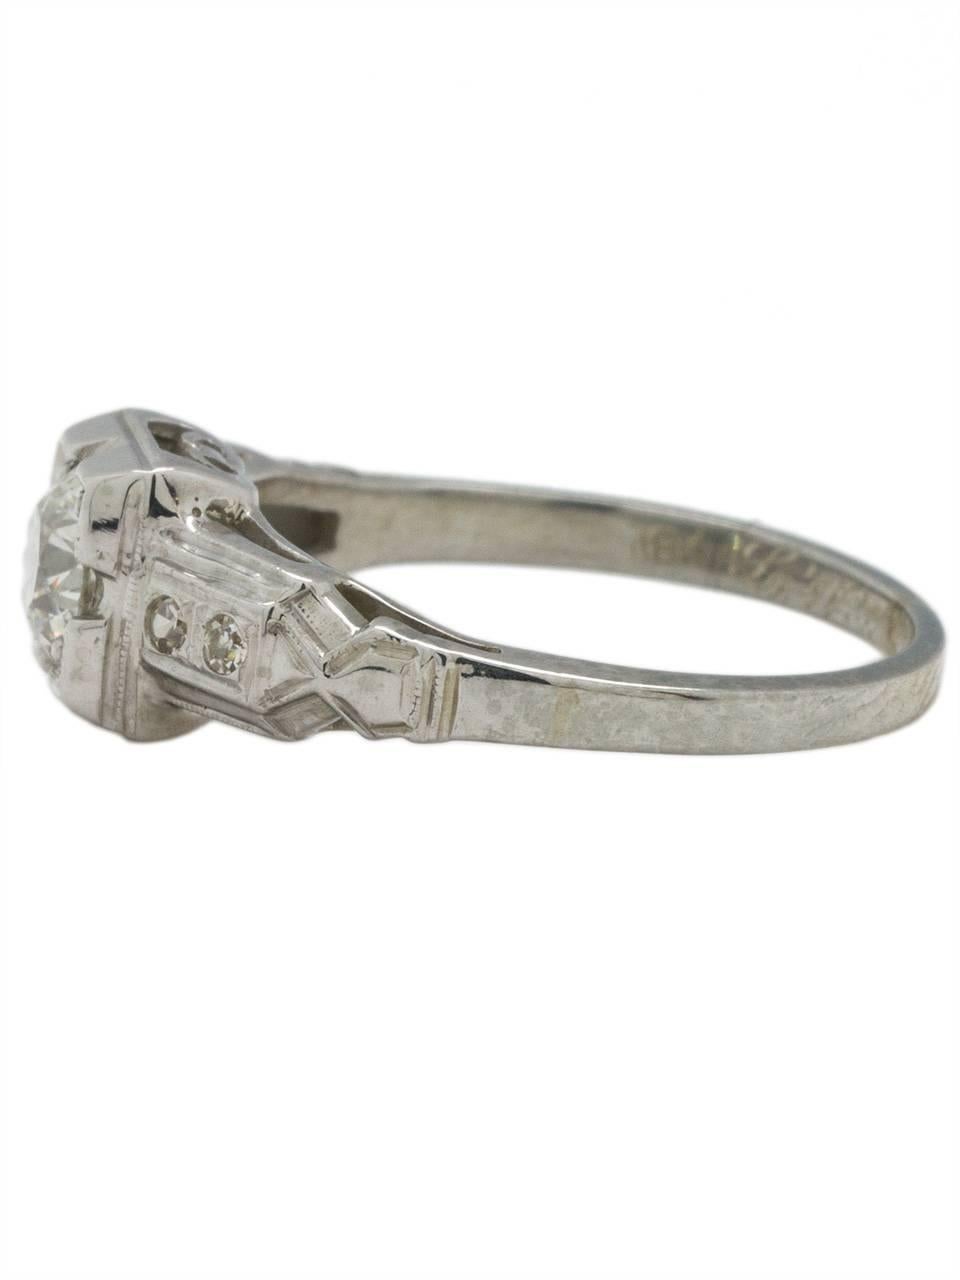 This gorgeous antique 18K white gold engagement ring is a classic example of Art Deco style- bold architectural lines with feminine details such as the open galleries with scroll motif and milgrain detail throughout. The lively .50ct Old European